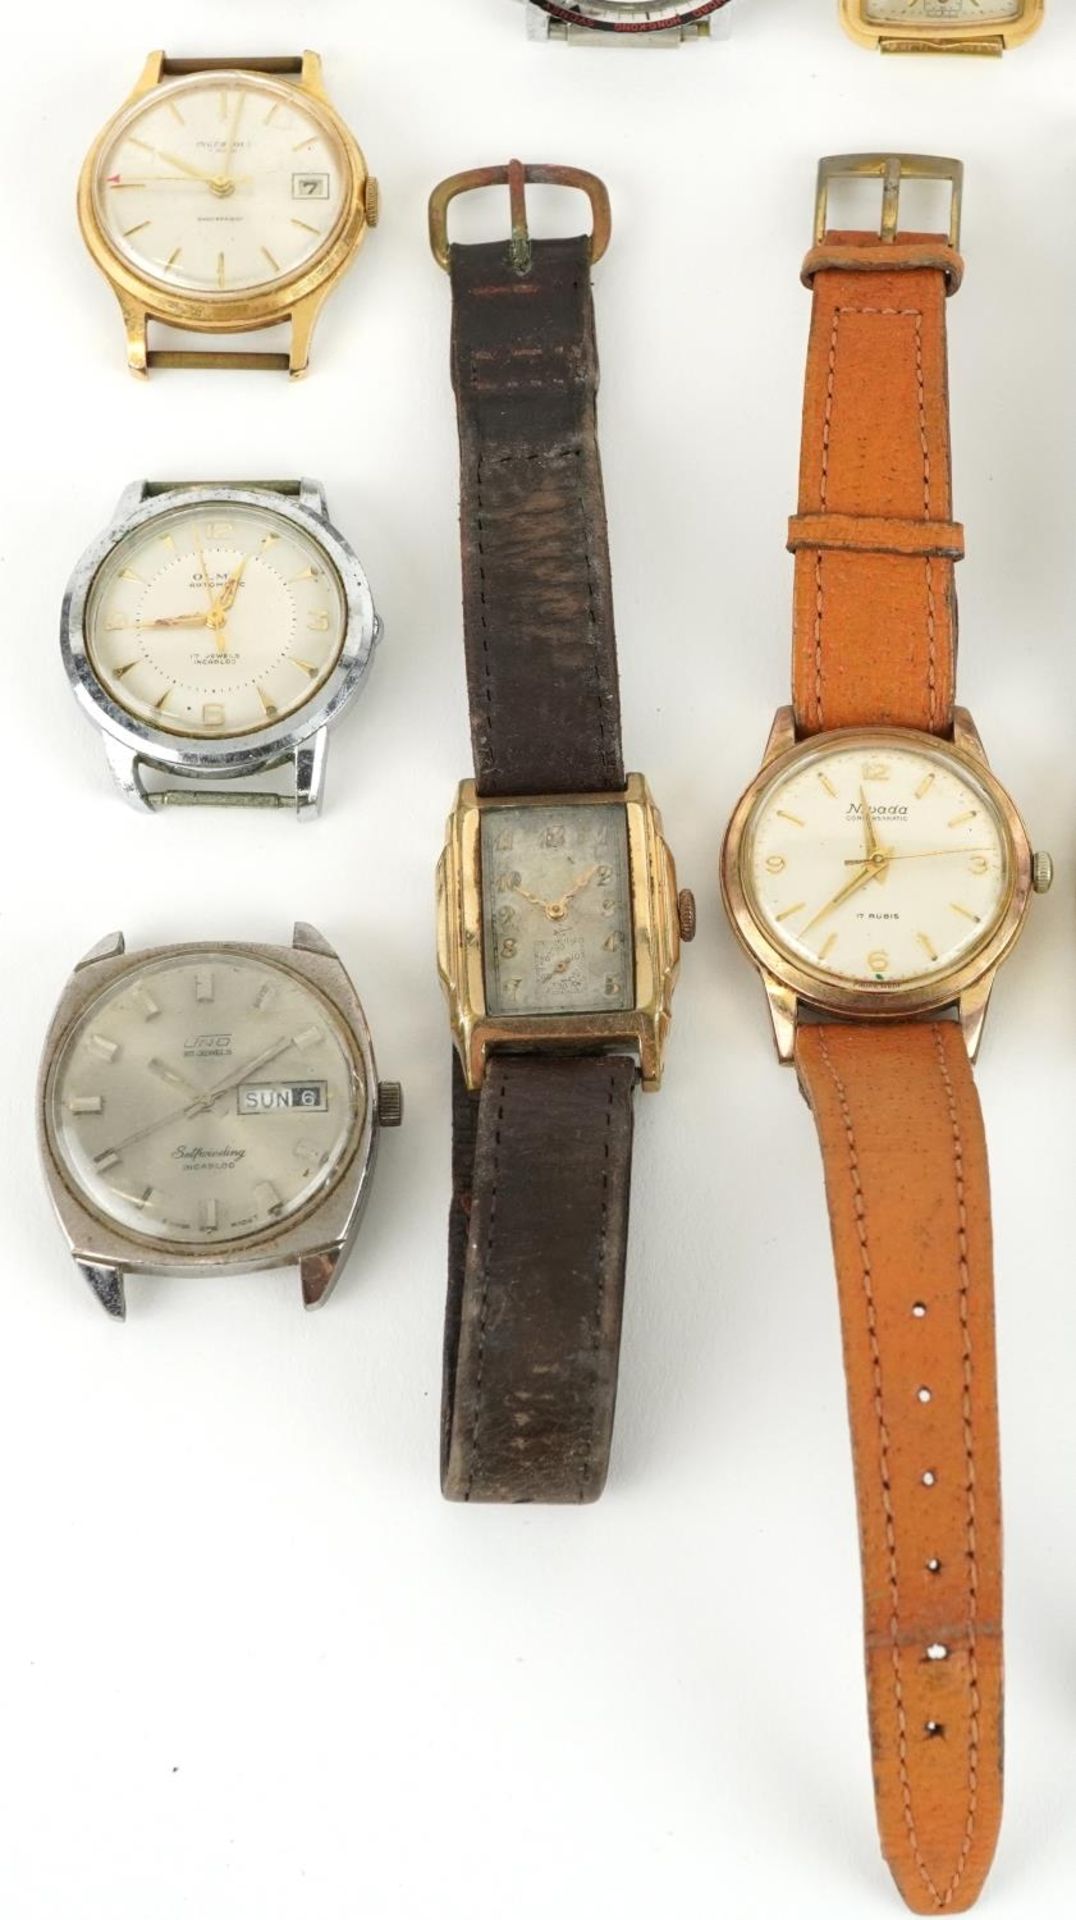 Fourteen vintage gentlemen's wristwatches and a watch movement including Hudson Seawatch, Smiths, - Image 3 of 4